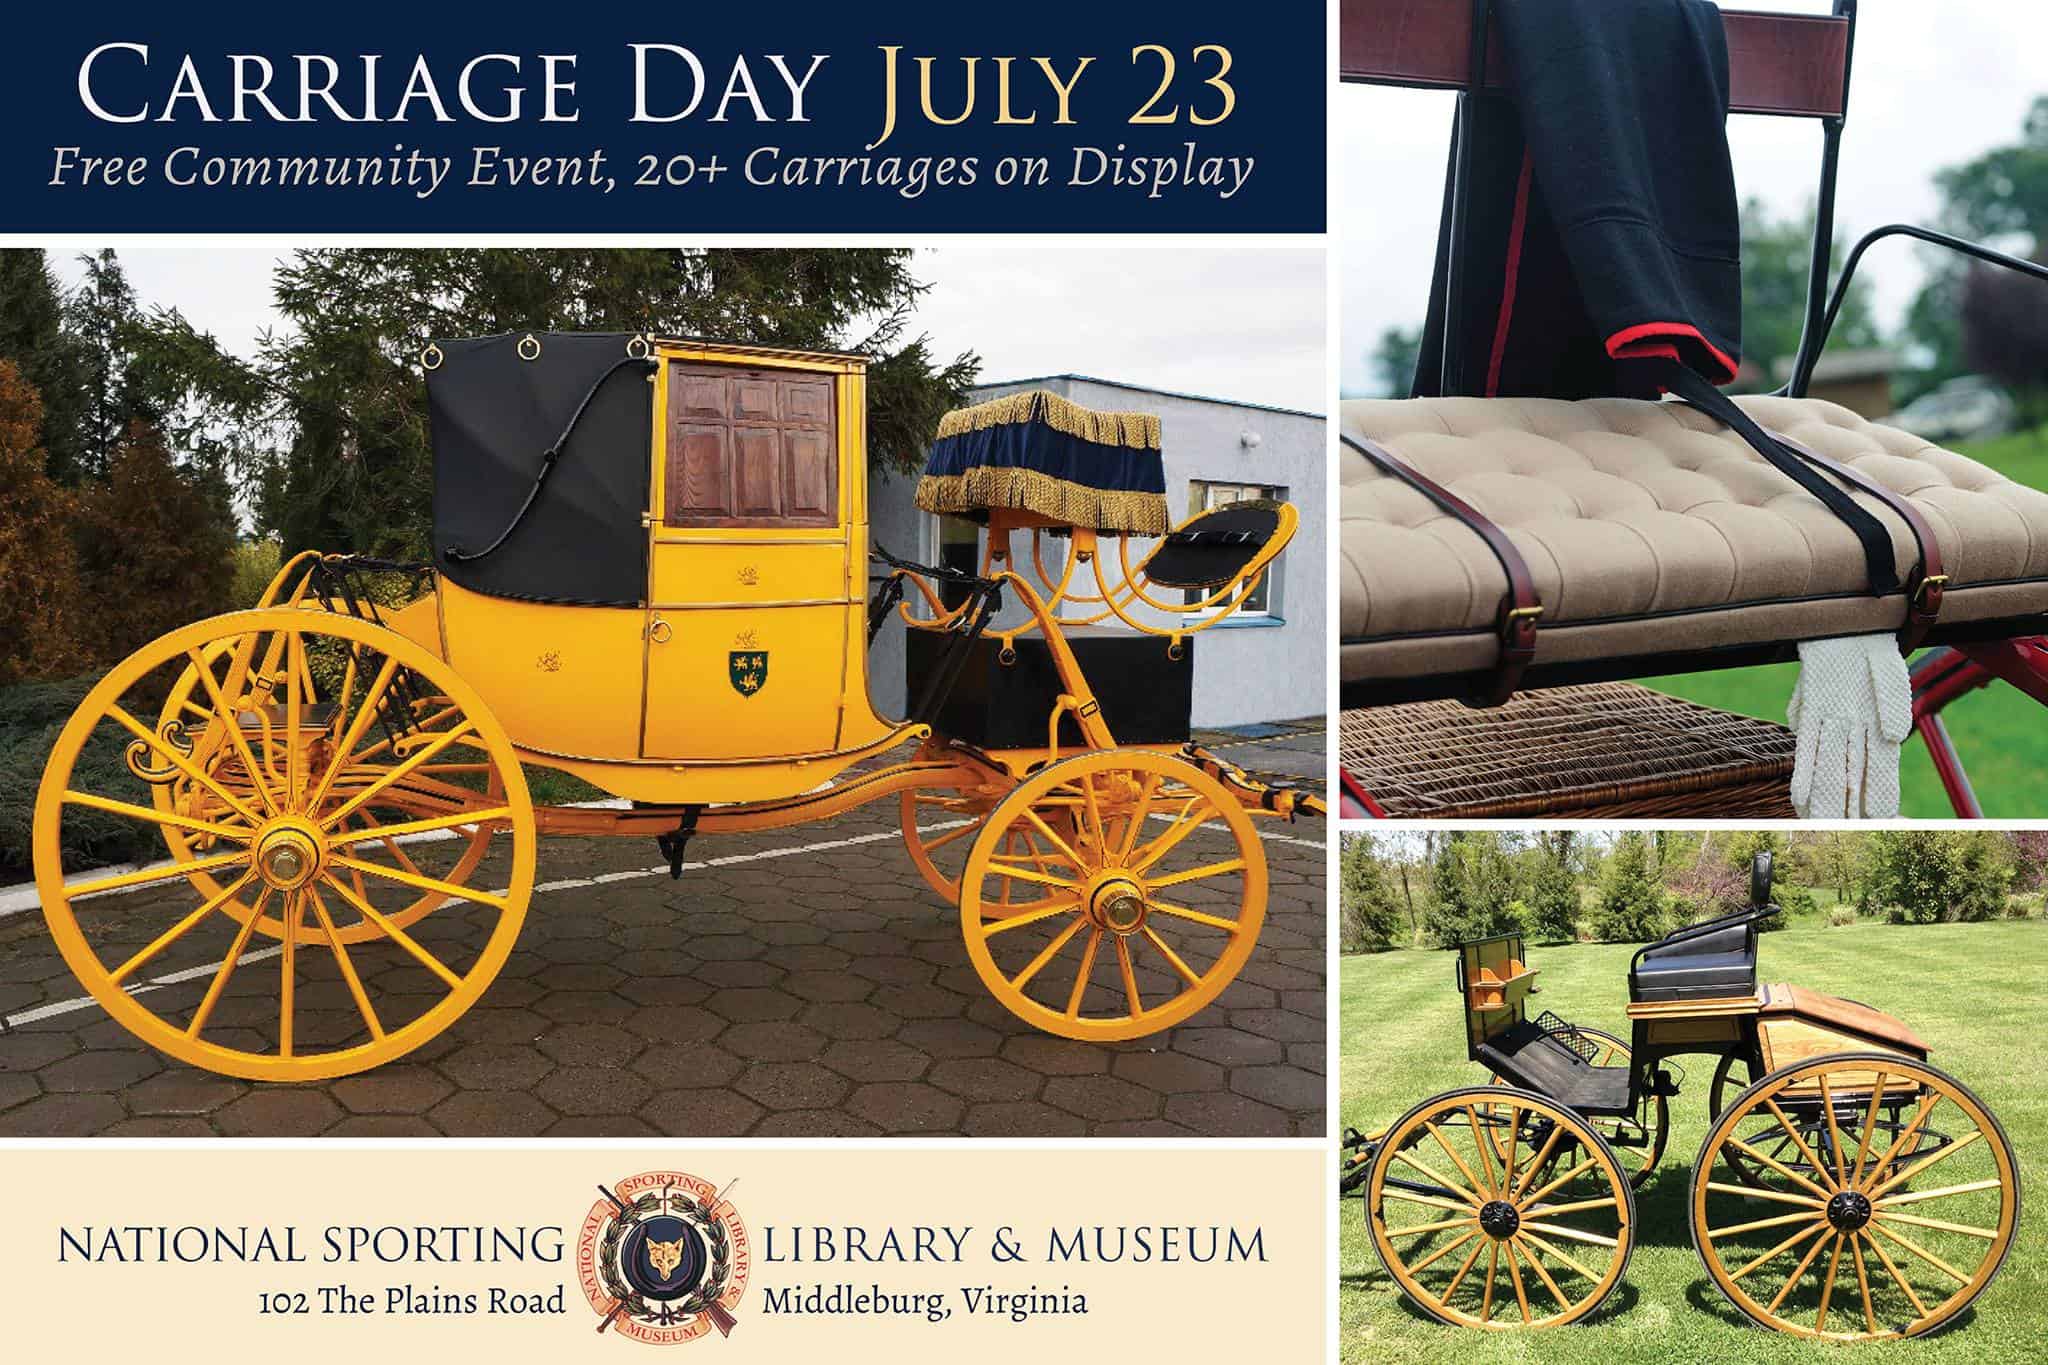 The National Sporting Library & Museum Presents Carriage Day